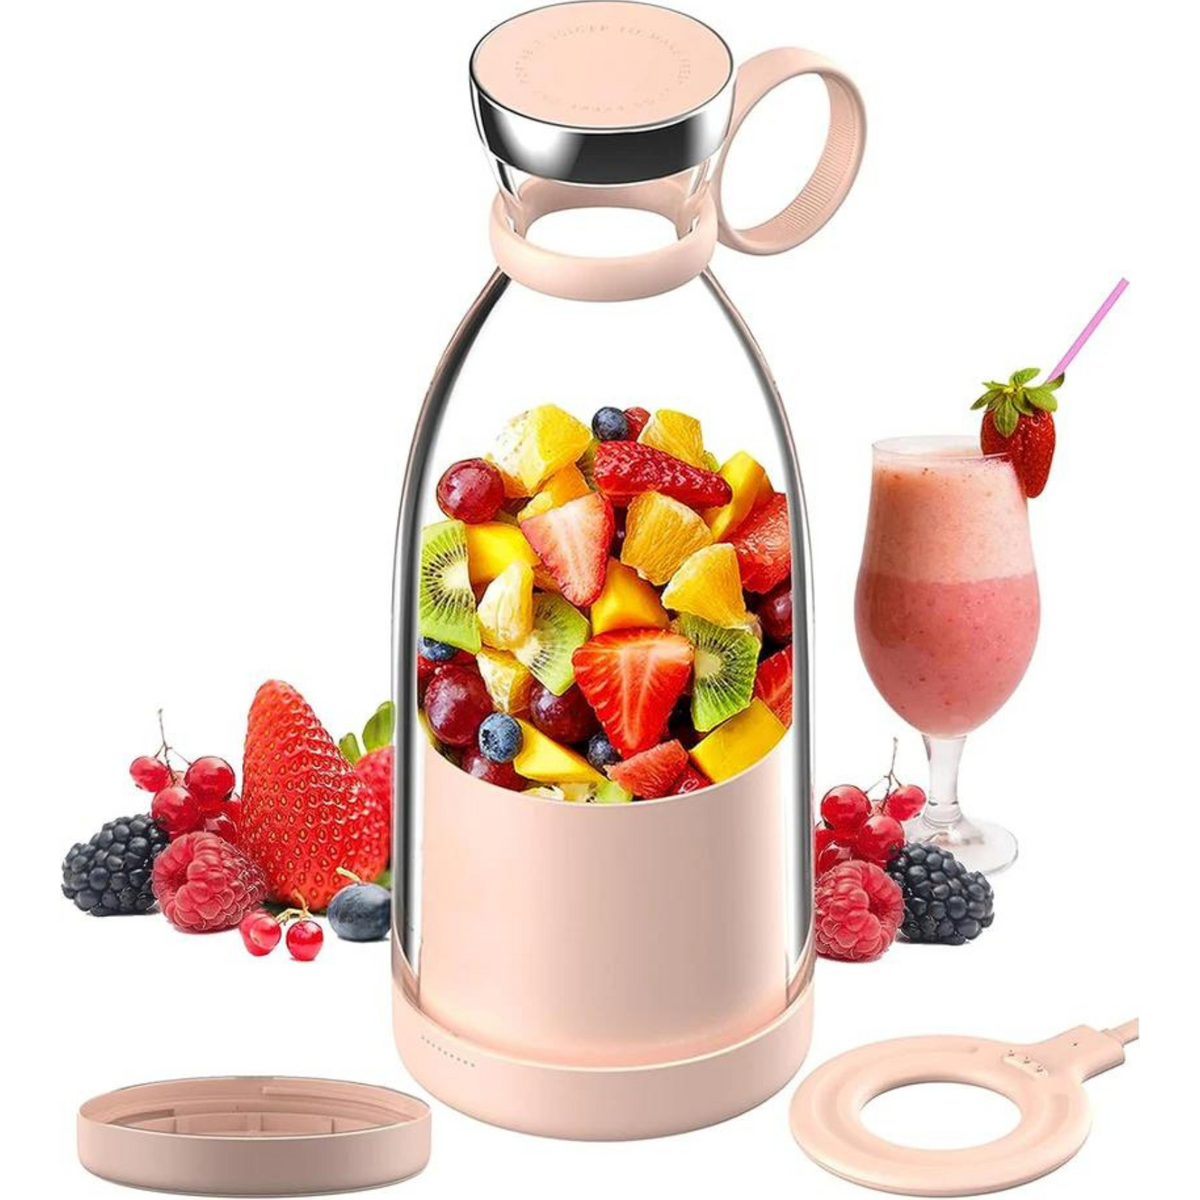 Wireless Portable Blender: On-the-go juicing for shakes & smoothies. High-quality, compact design